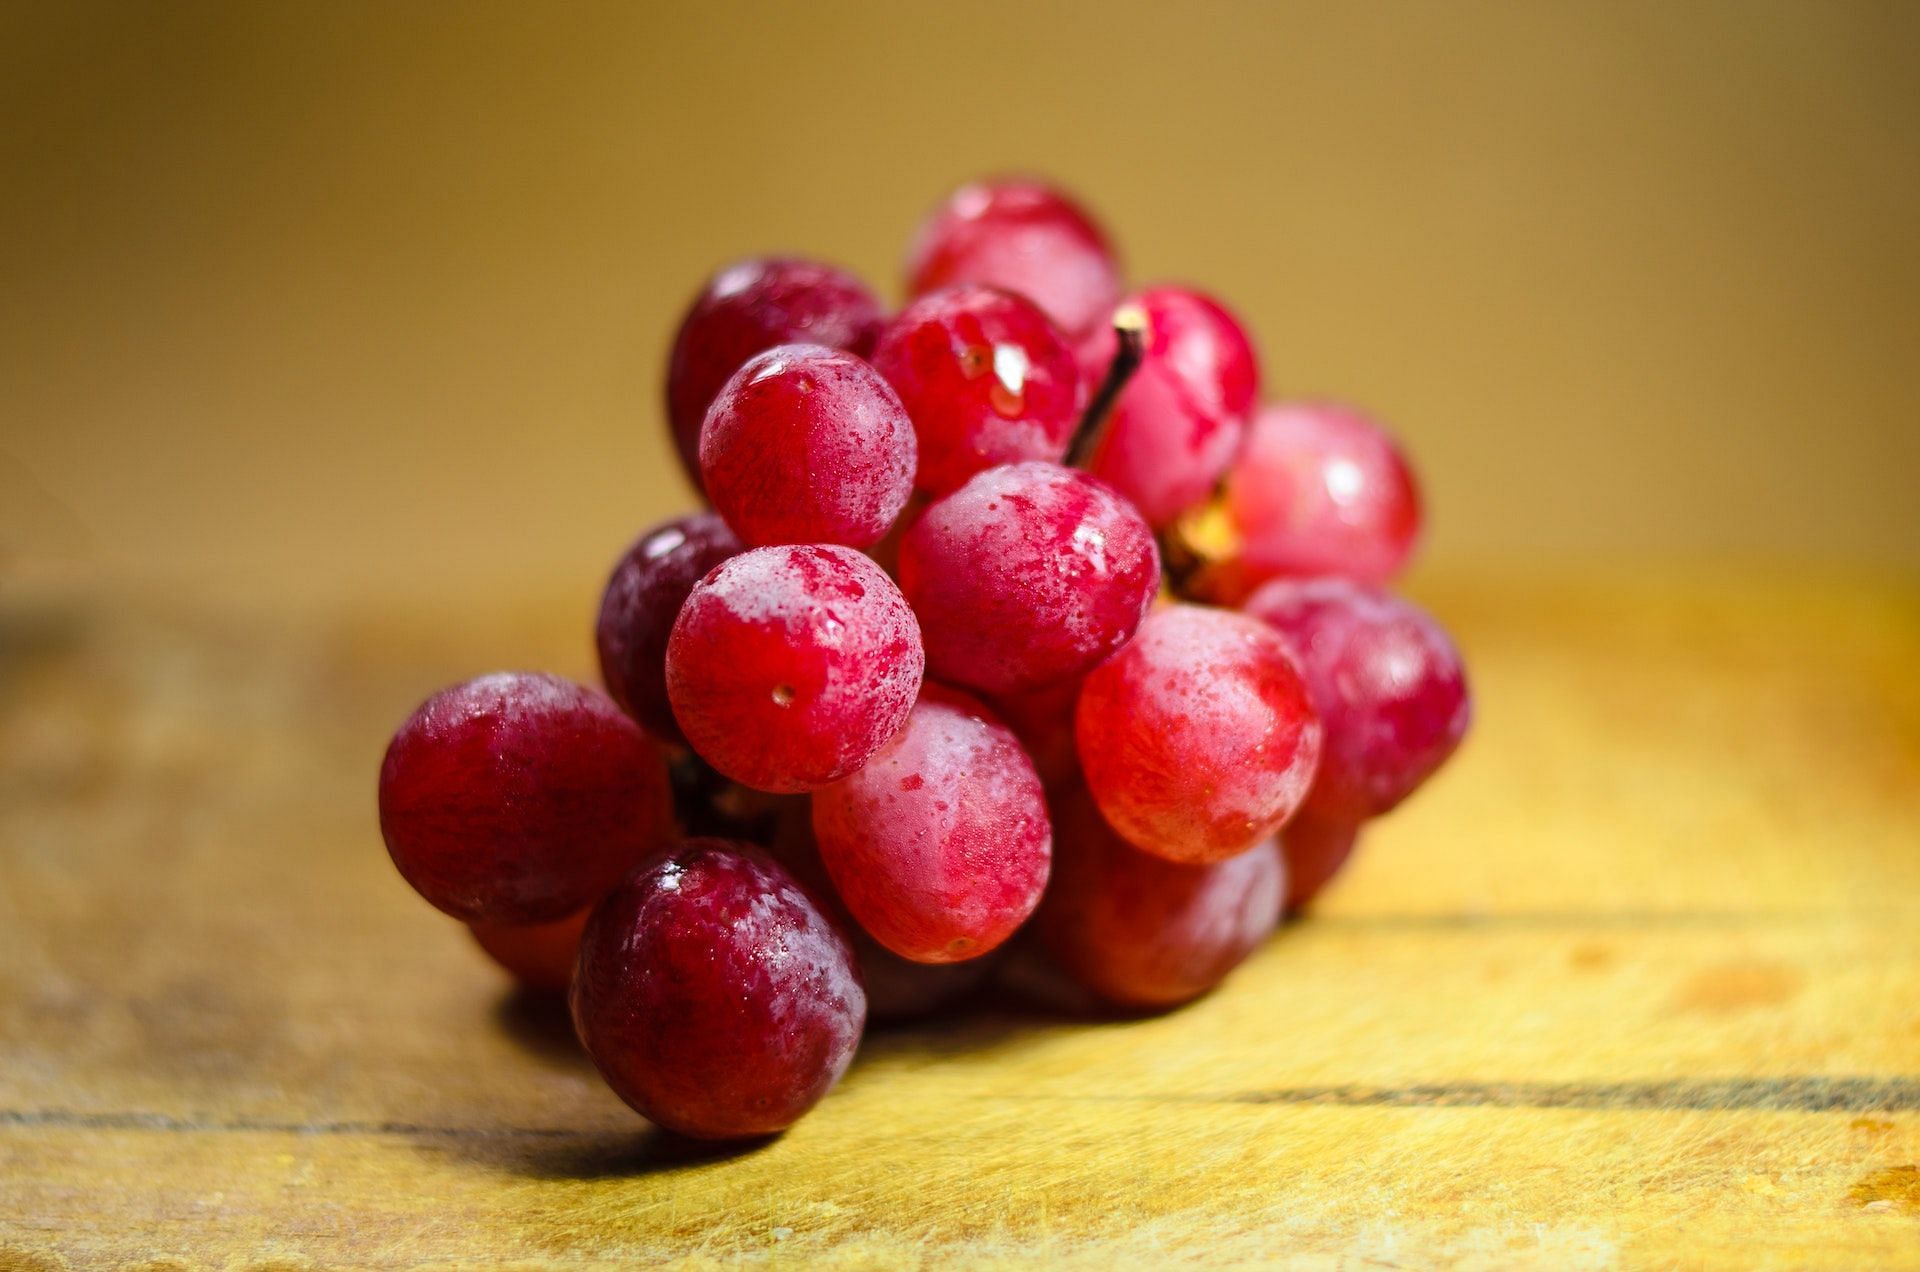 Red grapes are a kidney-friendly fruit. (Photo via Pexels/Bruno Scramgnon)